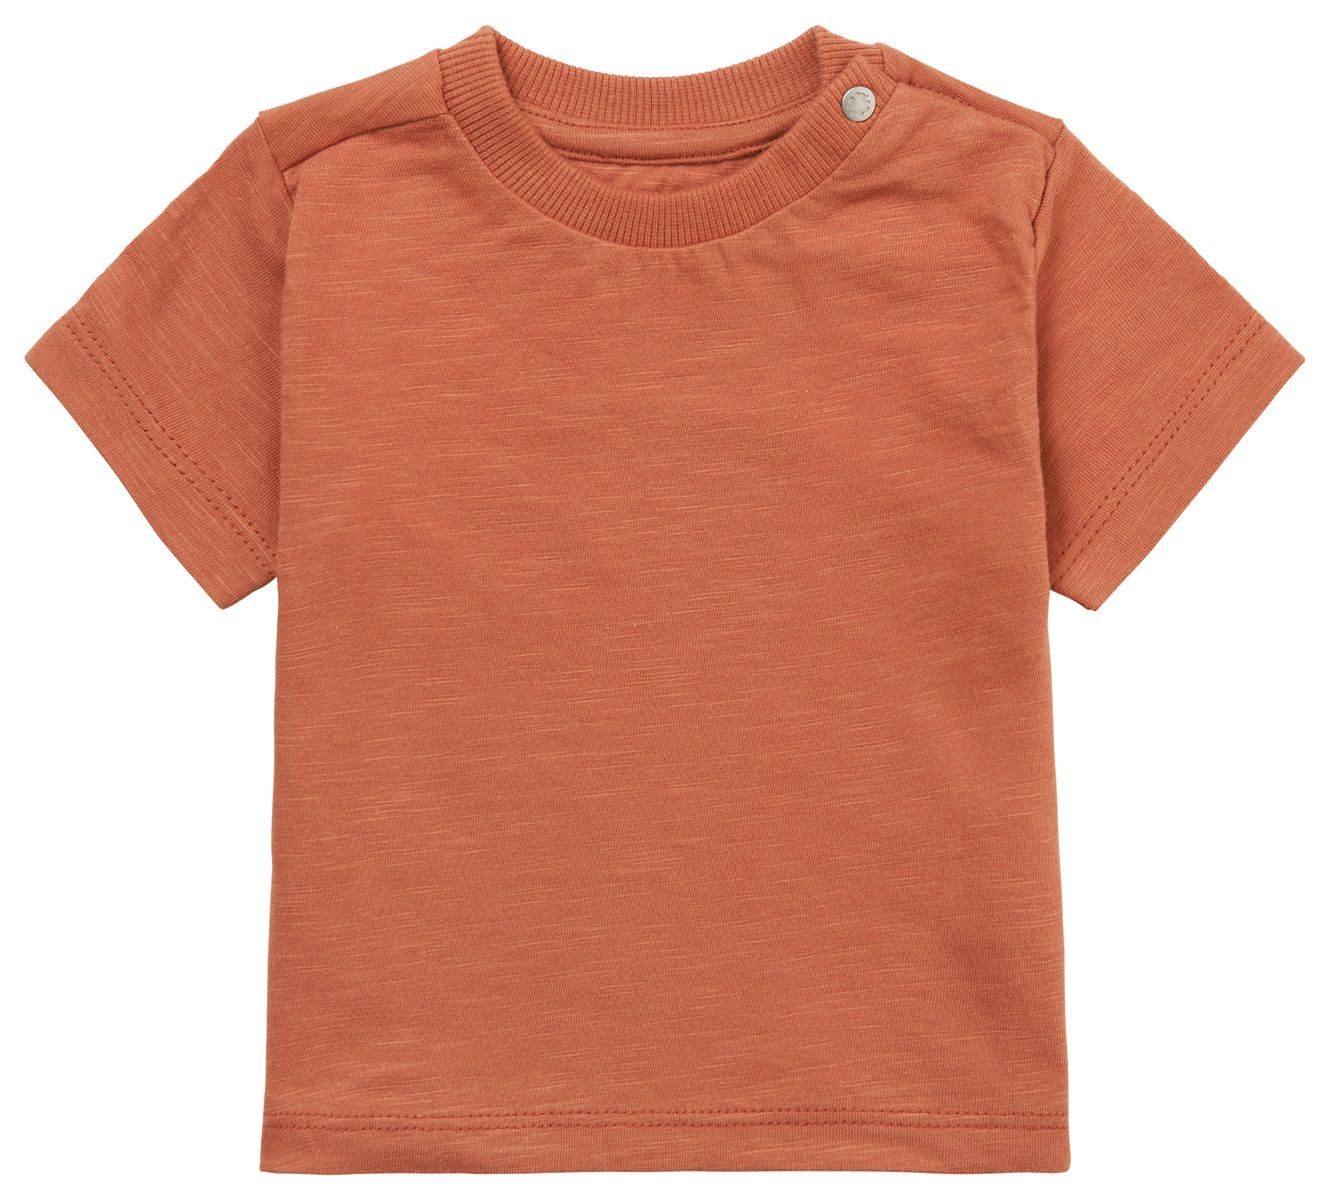 Nampa Almost Apricot Top